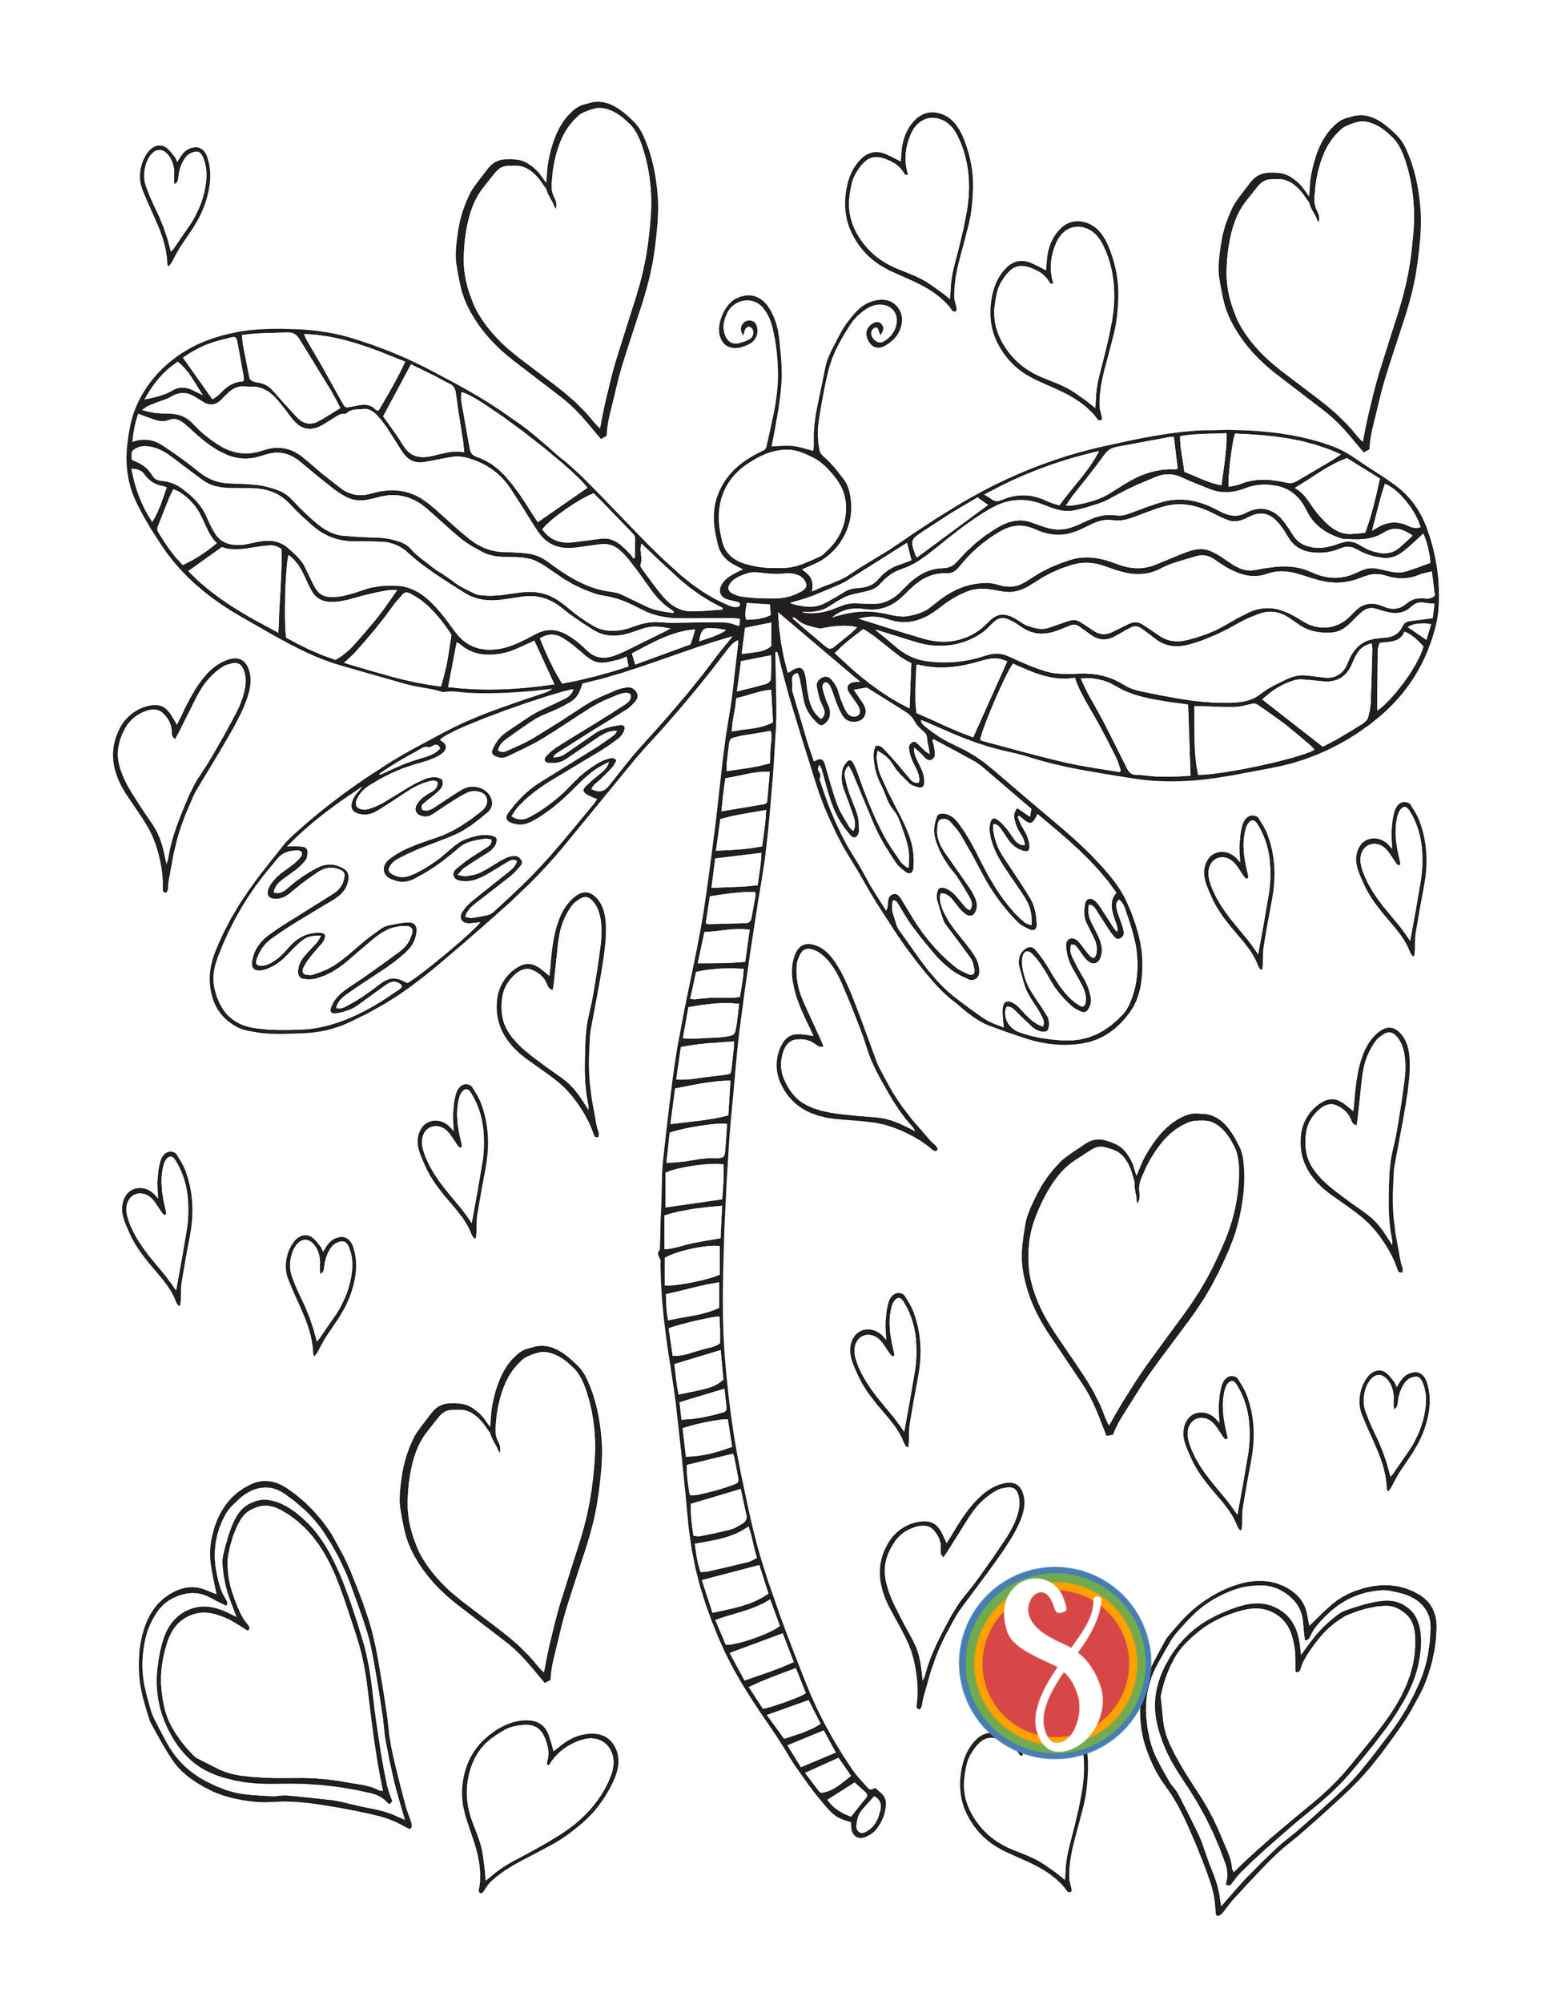 dragonfly full of doodles and surrounded by hearts as a coloring page